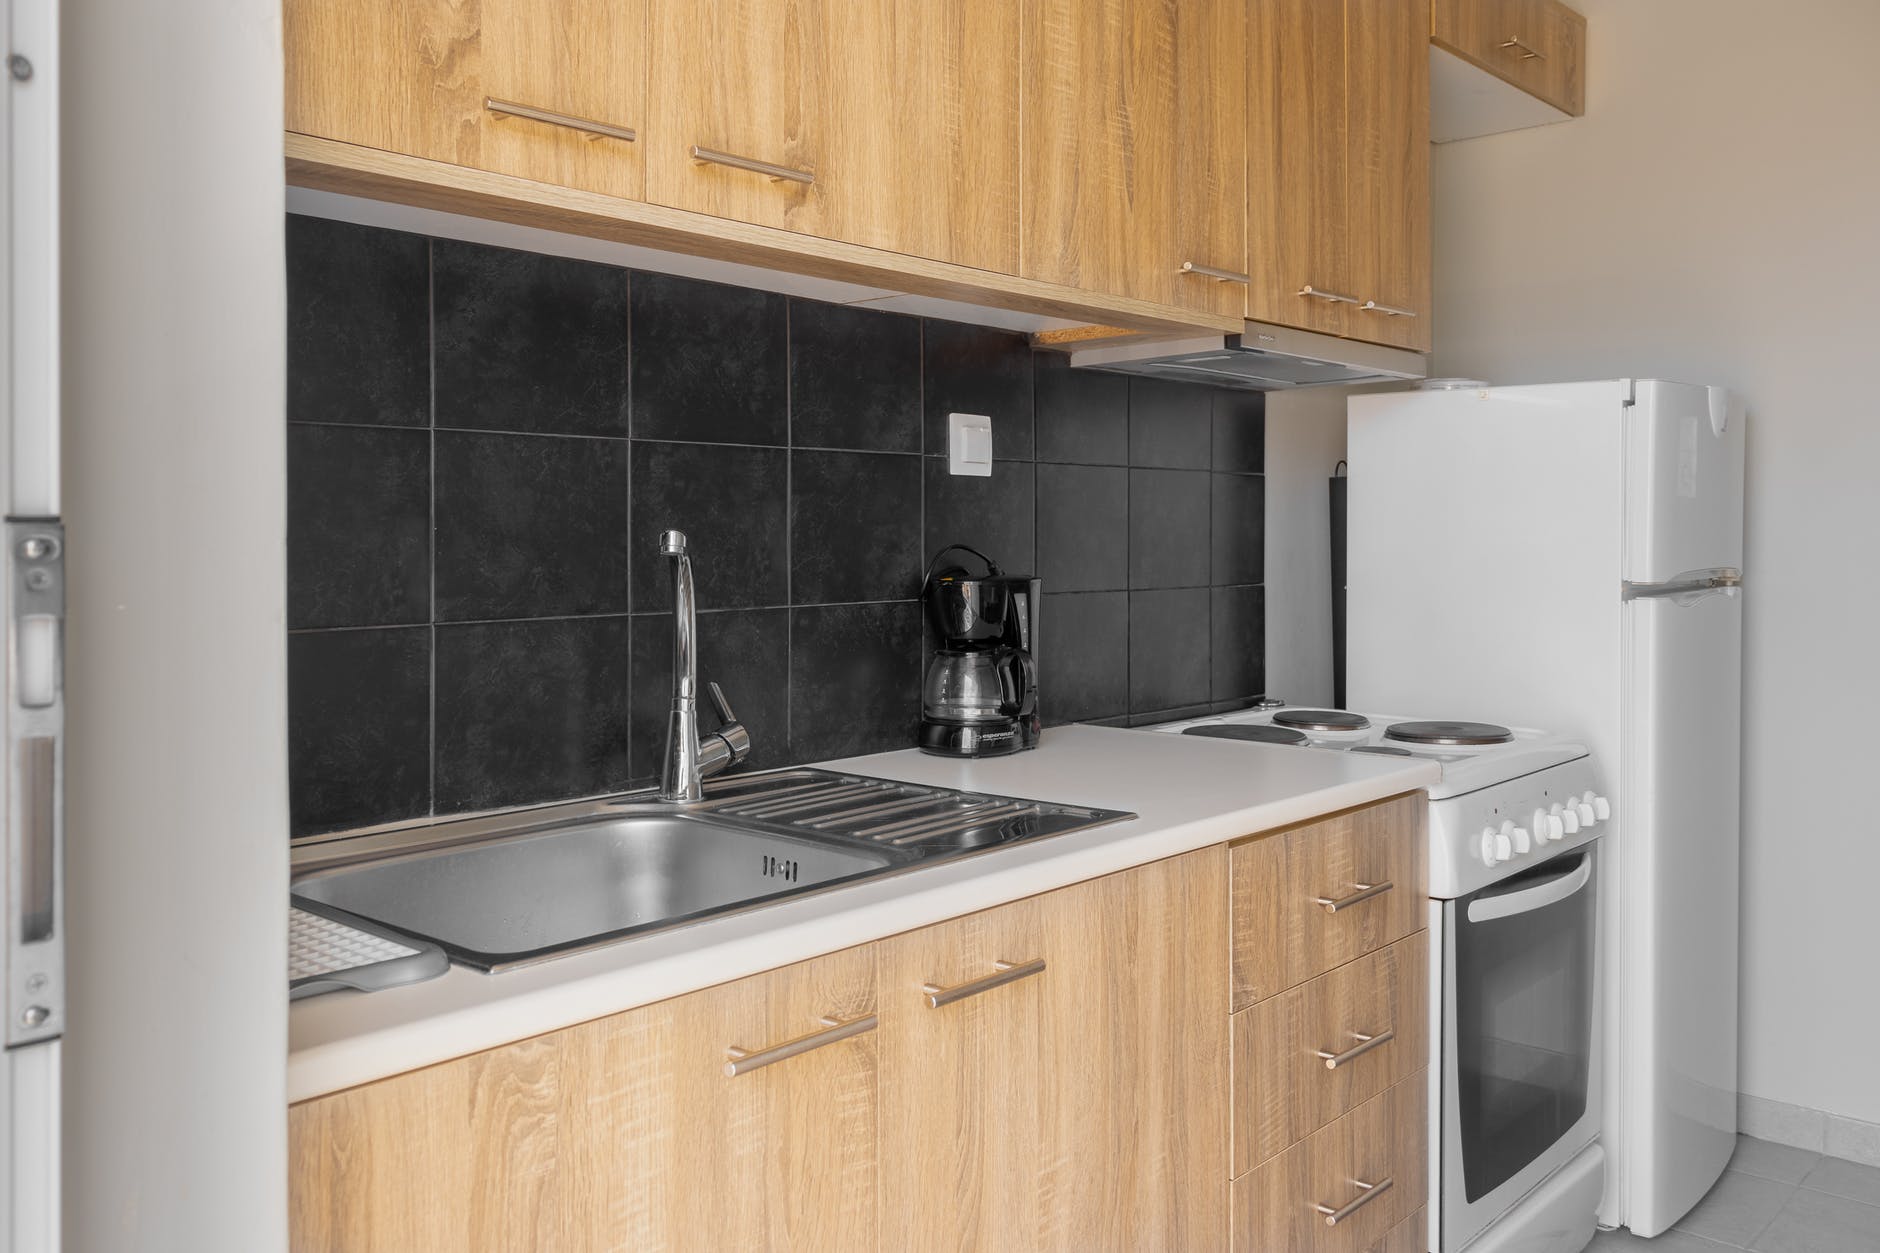 Best Appliances for Your Rental Property